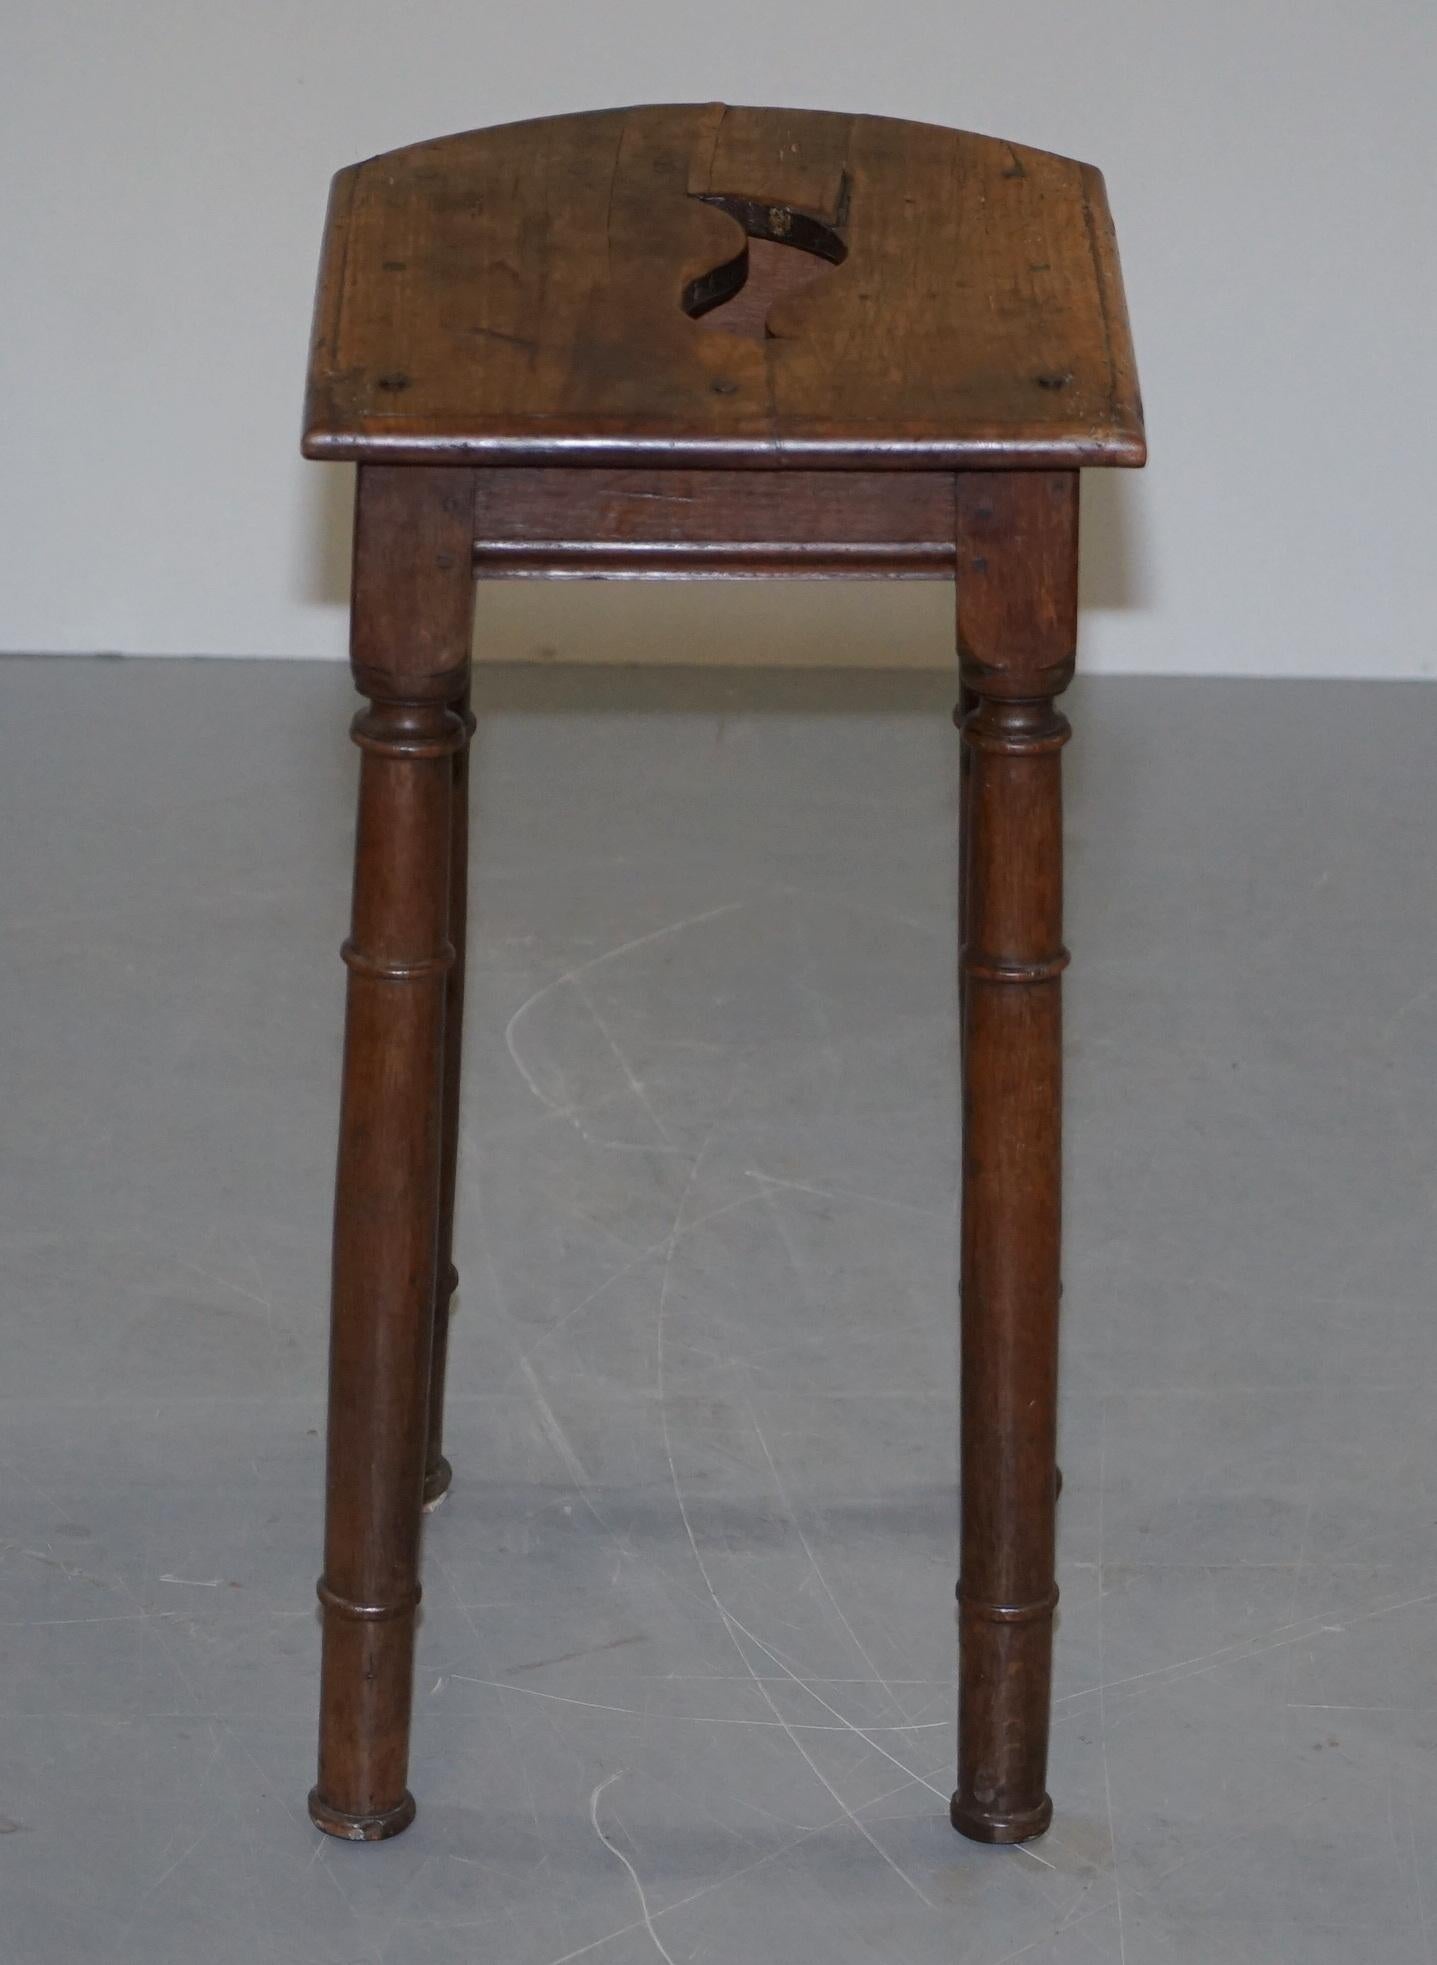 Georgian Lovely 18th Century Dutch Stool with Handle Cut Out in the Top Bar Pub Study